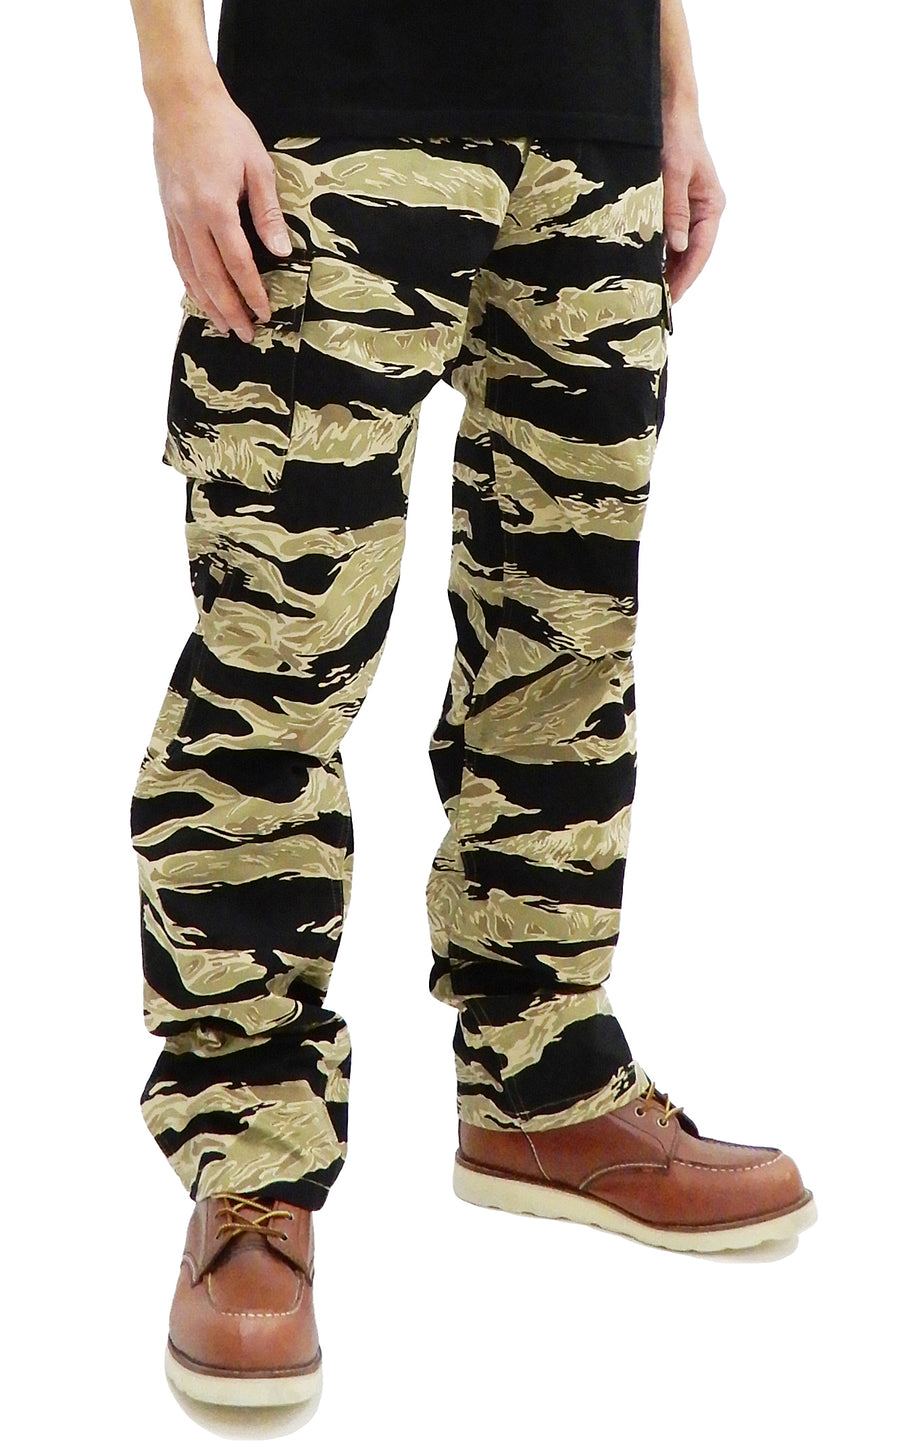 Women Camouflage Long Pants Camo Cargo Trousers Casual Summer Pants  Military Army Combat Sports Fashion Clothes